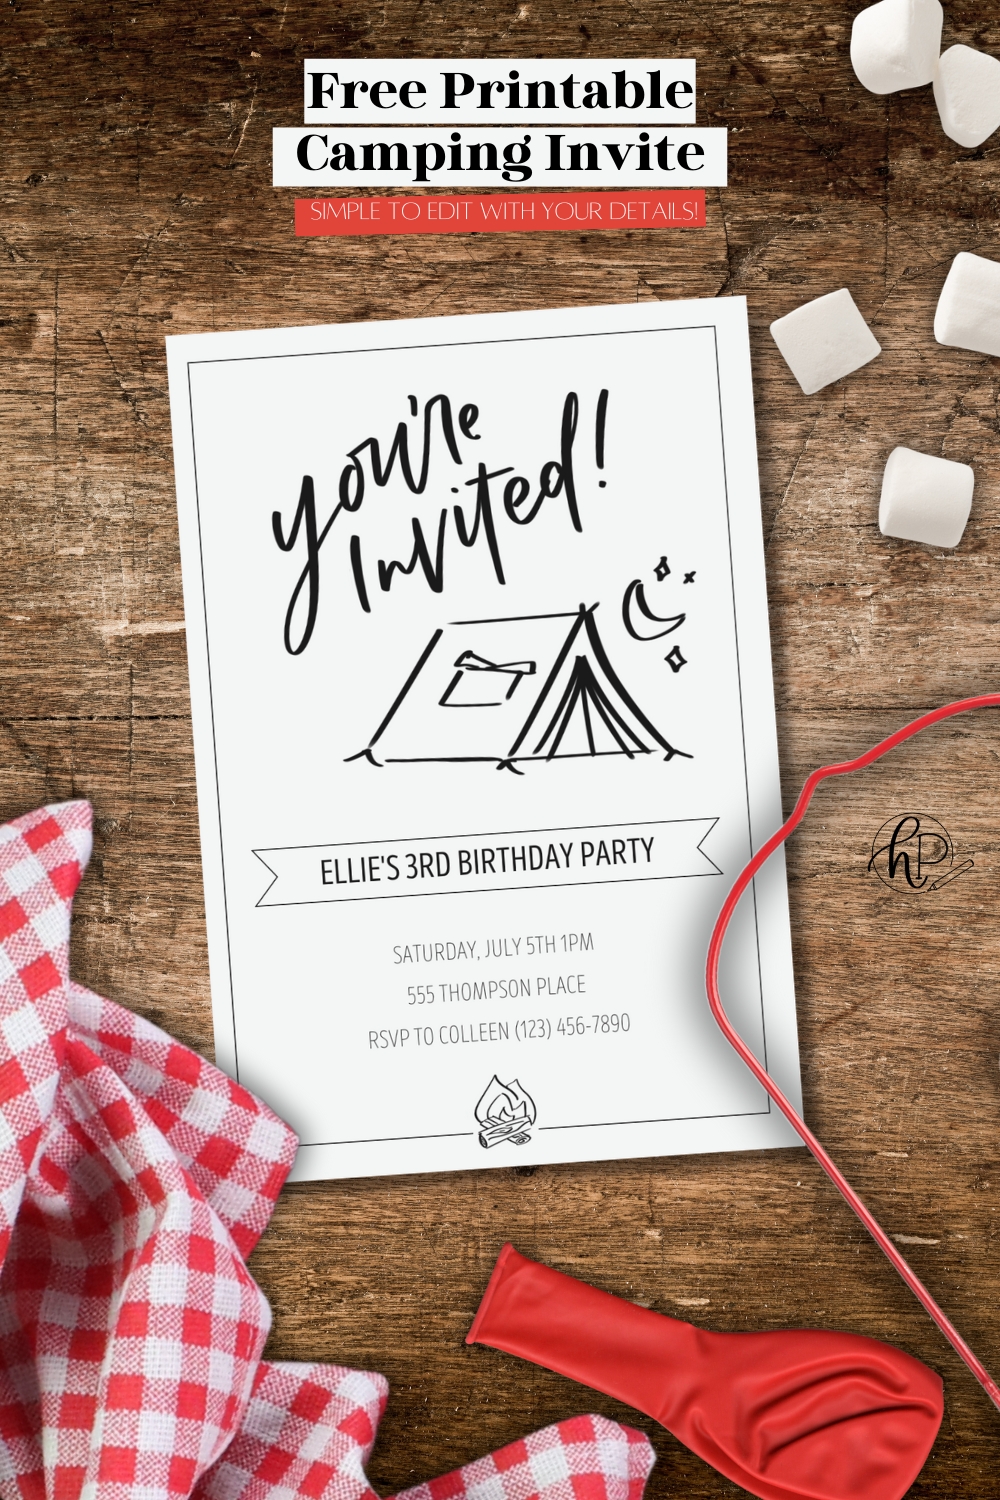 printed camping party invitations that include a hand lettered title "you're invited", along with a hand drawn tent, and camp fire.